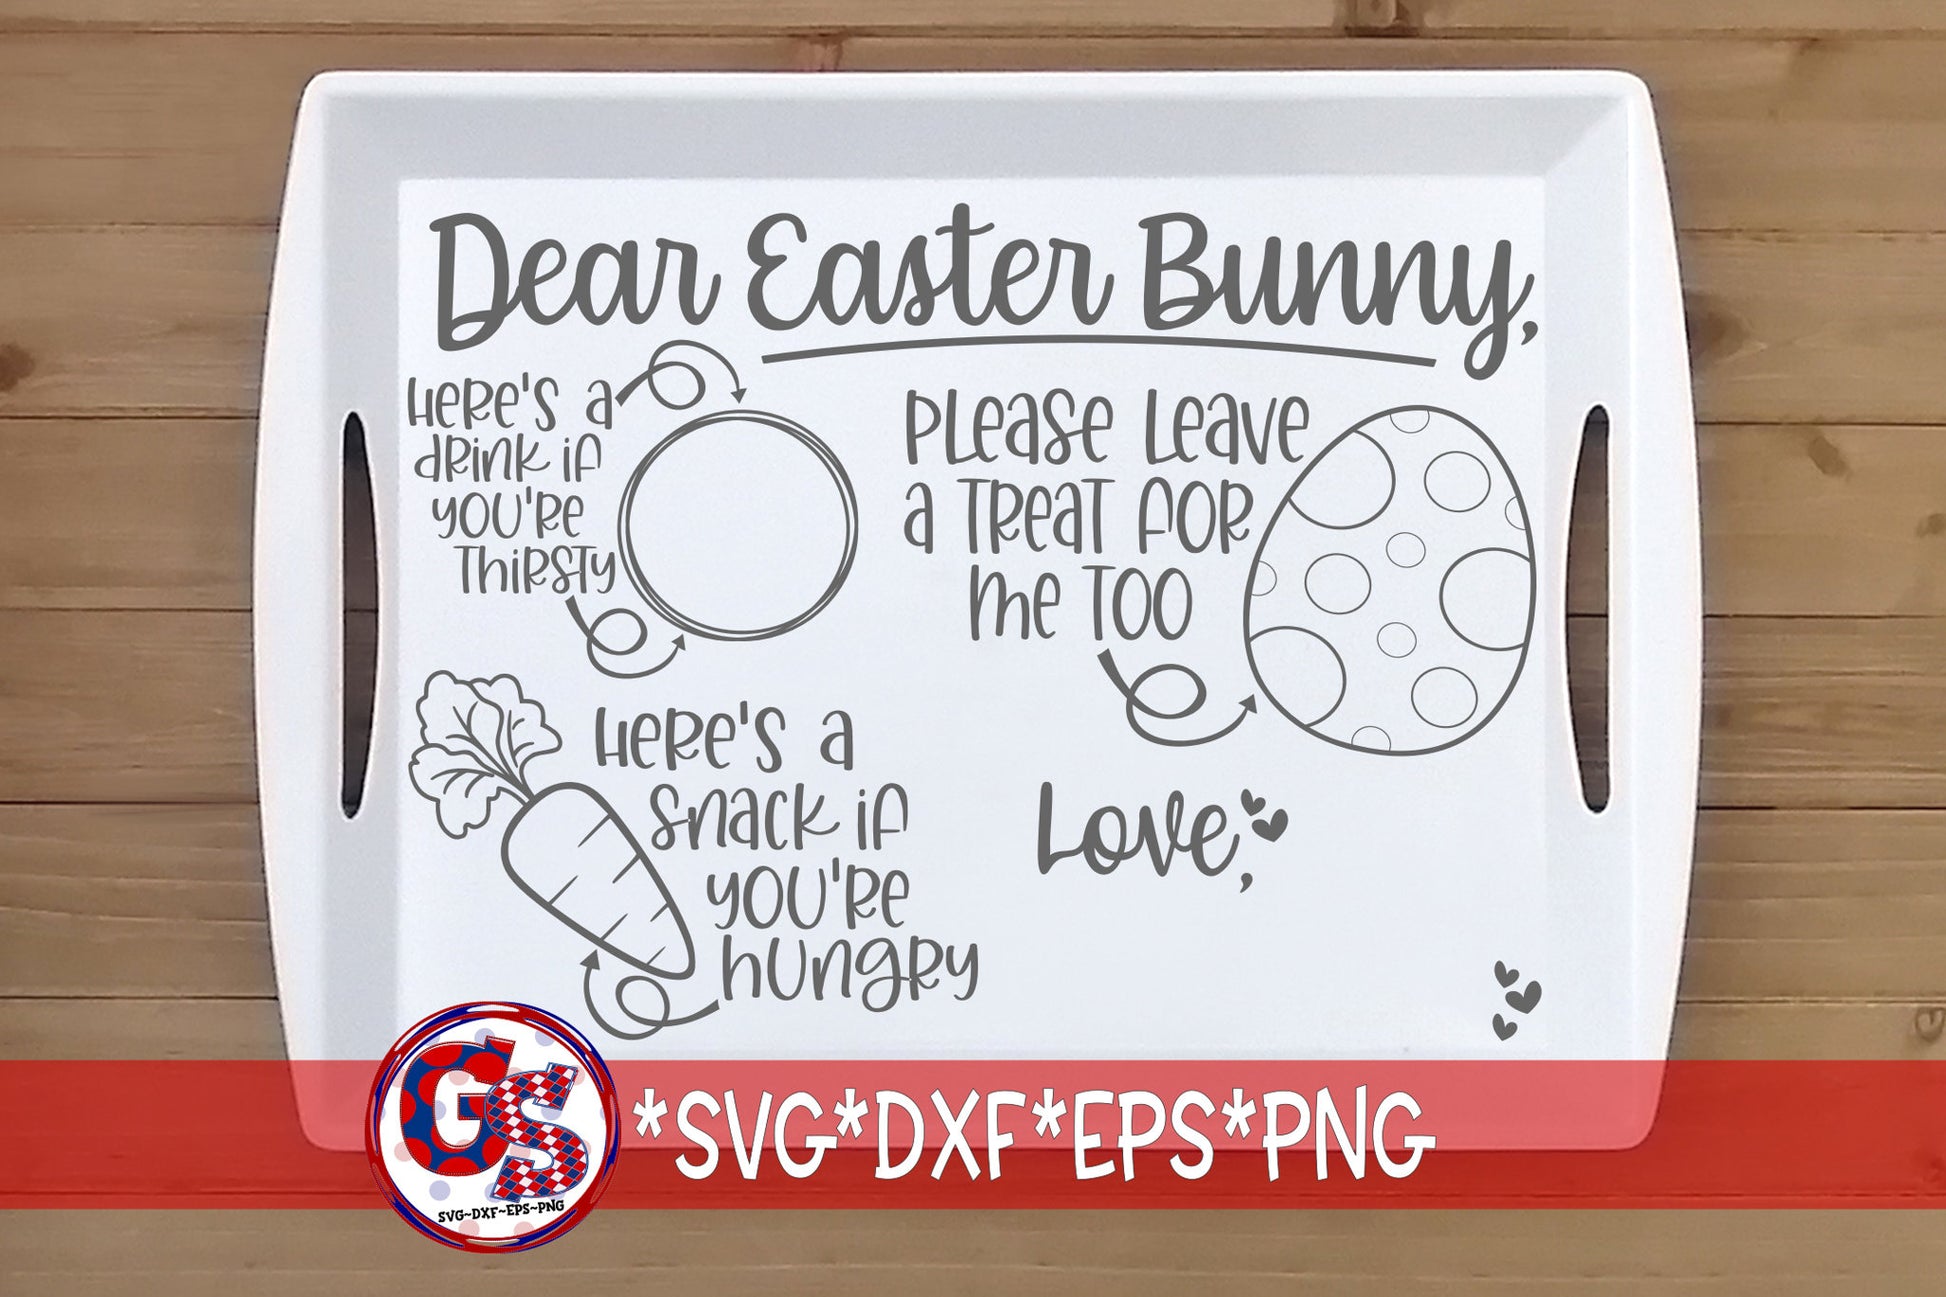 Easter Placemat SvG, DxF, EpS, PnG. Easter Tray SVG | Dear Easter Bunny SvG | SvG | Easter DxF | Easter EpS | Instant Download Cut Files.